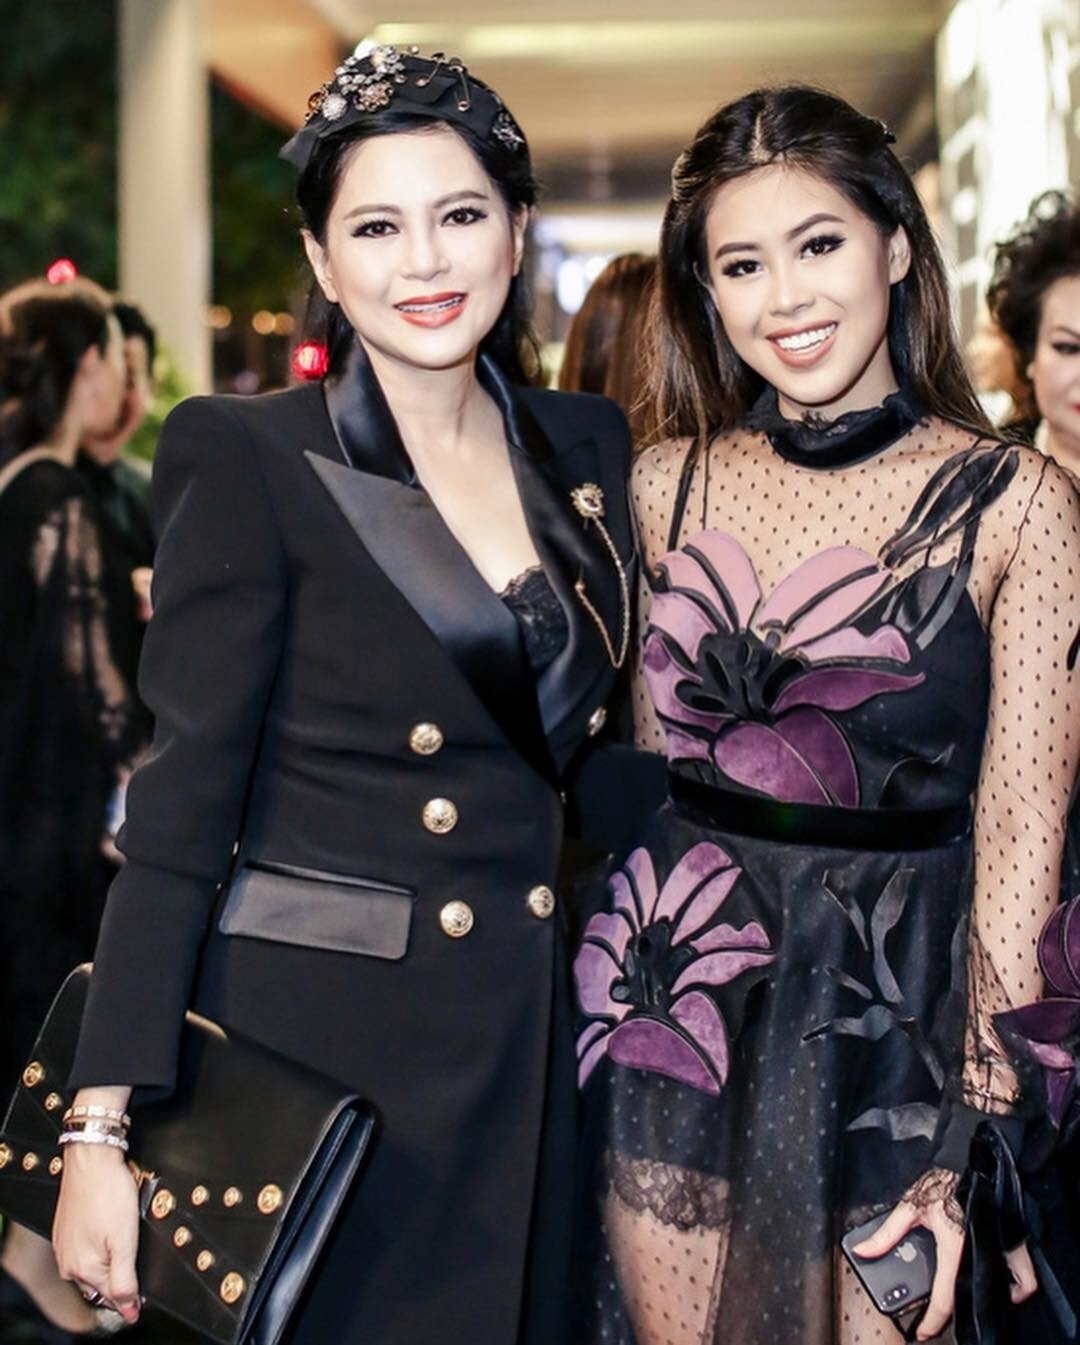 Tien Nguyen (right) and her mother, Thuy Tien. Photo: Instagram@tiennguyenn